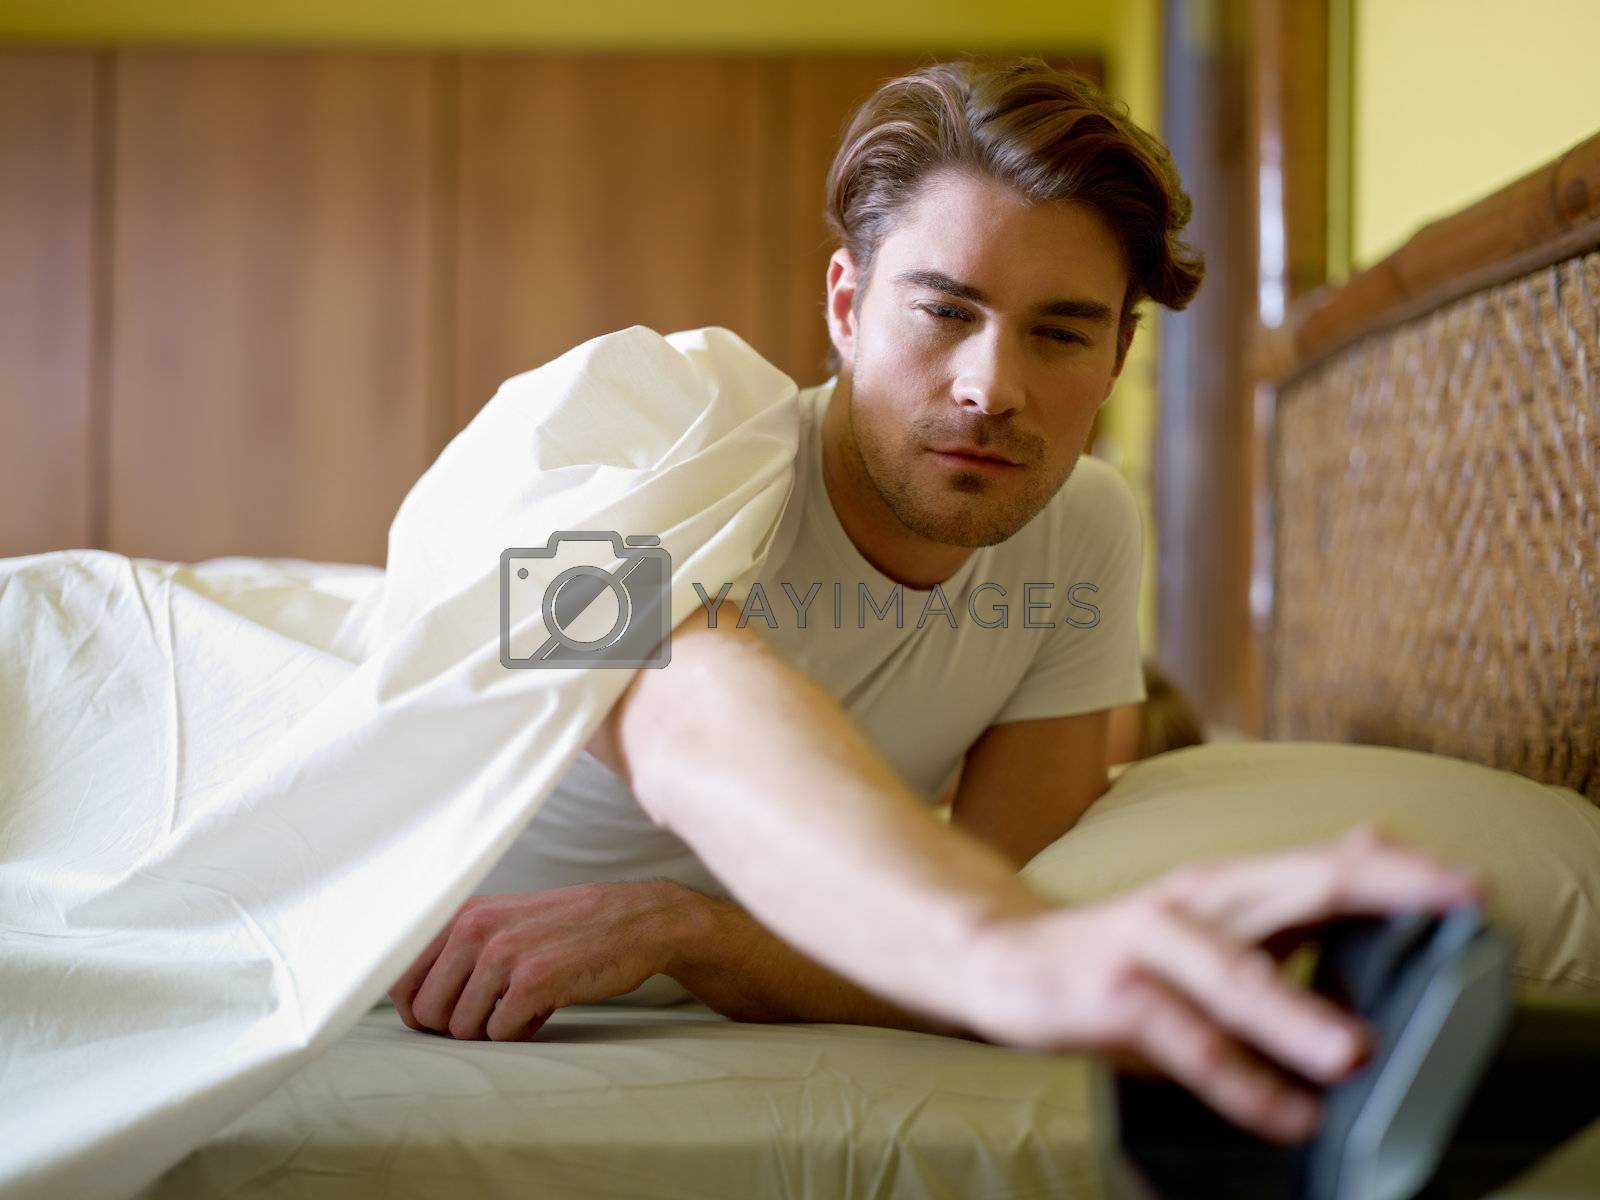 Royalty free image of young adult man waking up in the morning by diego_cervo